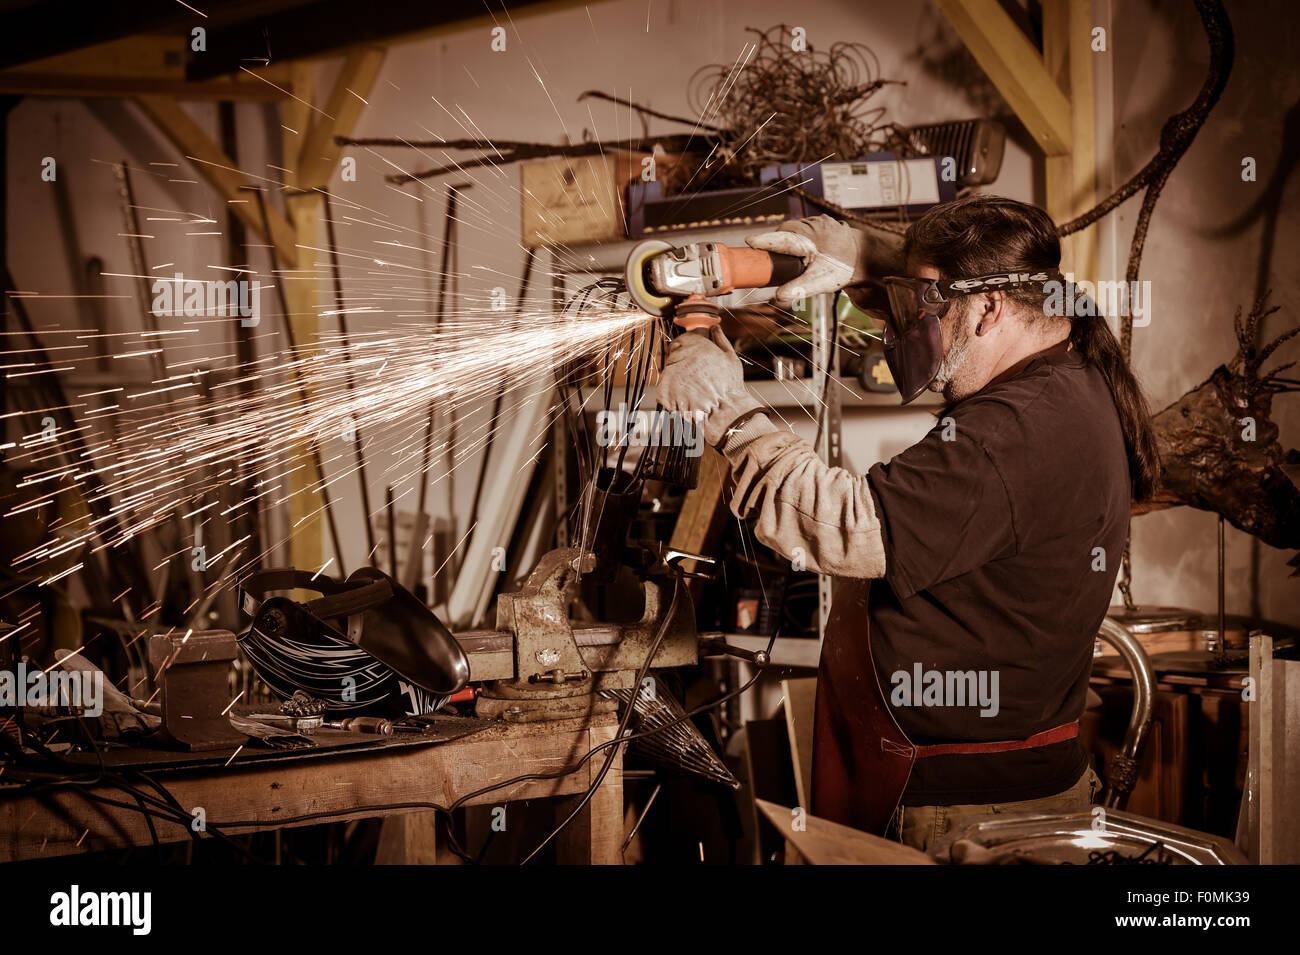 Metal worker Grinding with sparks in workshop Stock Photo